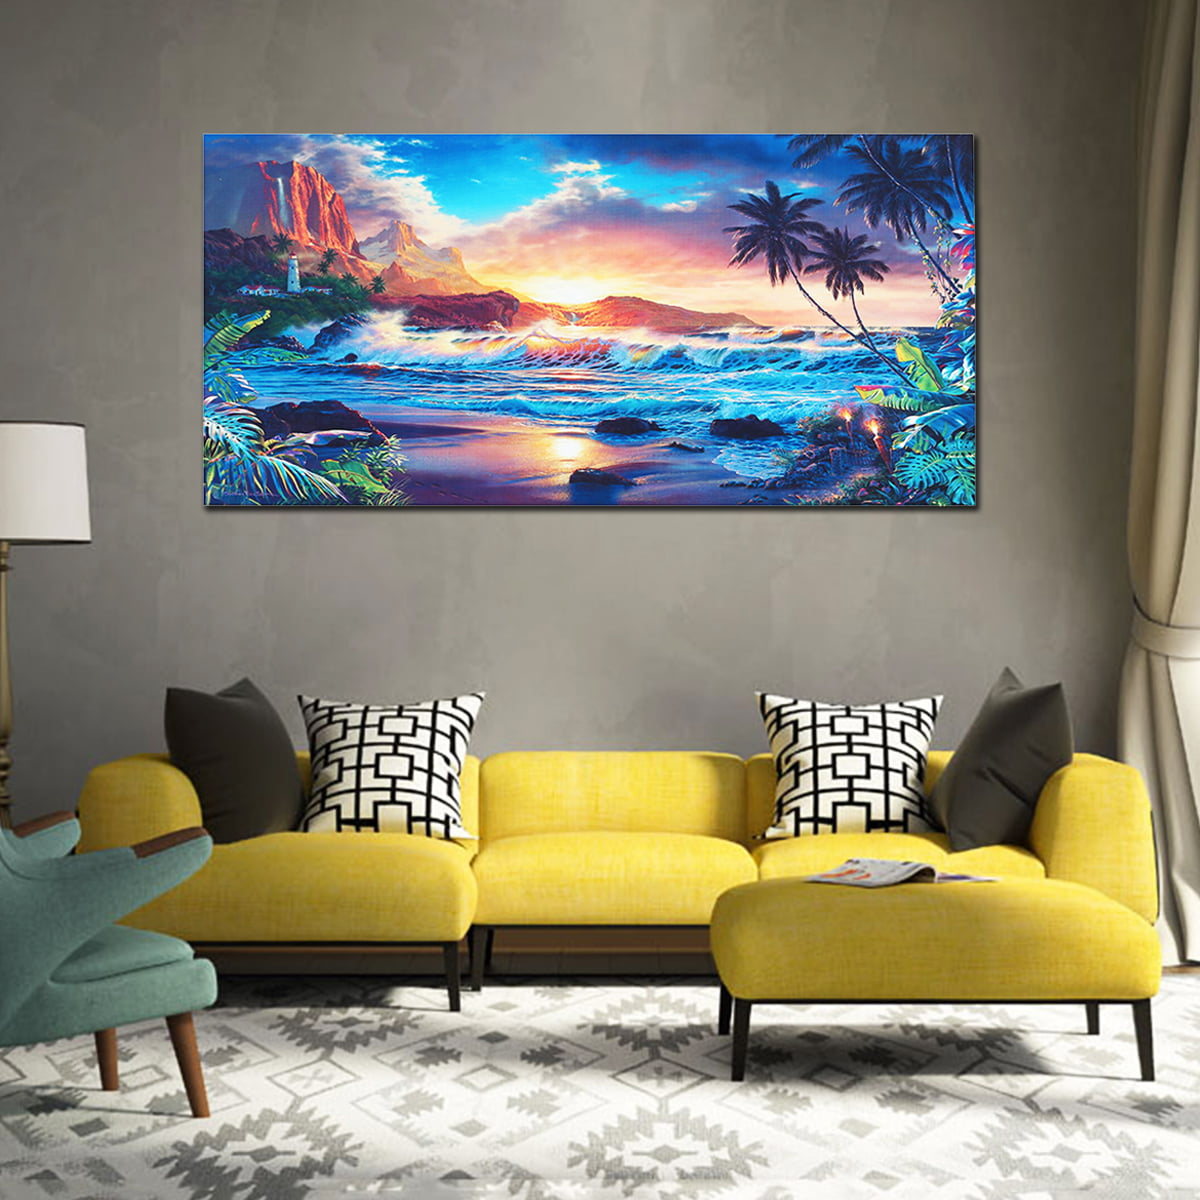 Kreative Arts Canvas Print for Home Decoration Sunset Seascape Coco Beach Modern Painting Wall Art Picture Print on Canvas Framed and Ready to Hang 20x30 Creative Arts Inc 7994 